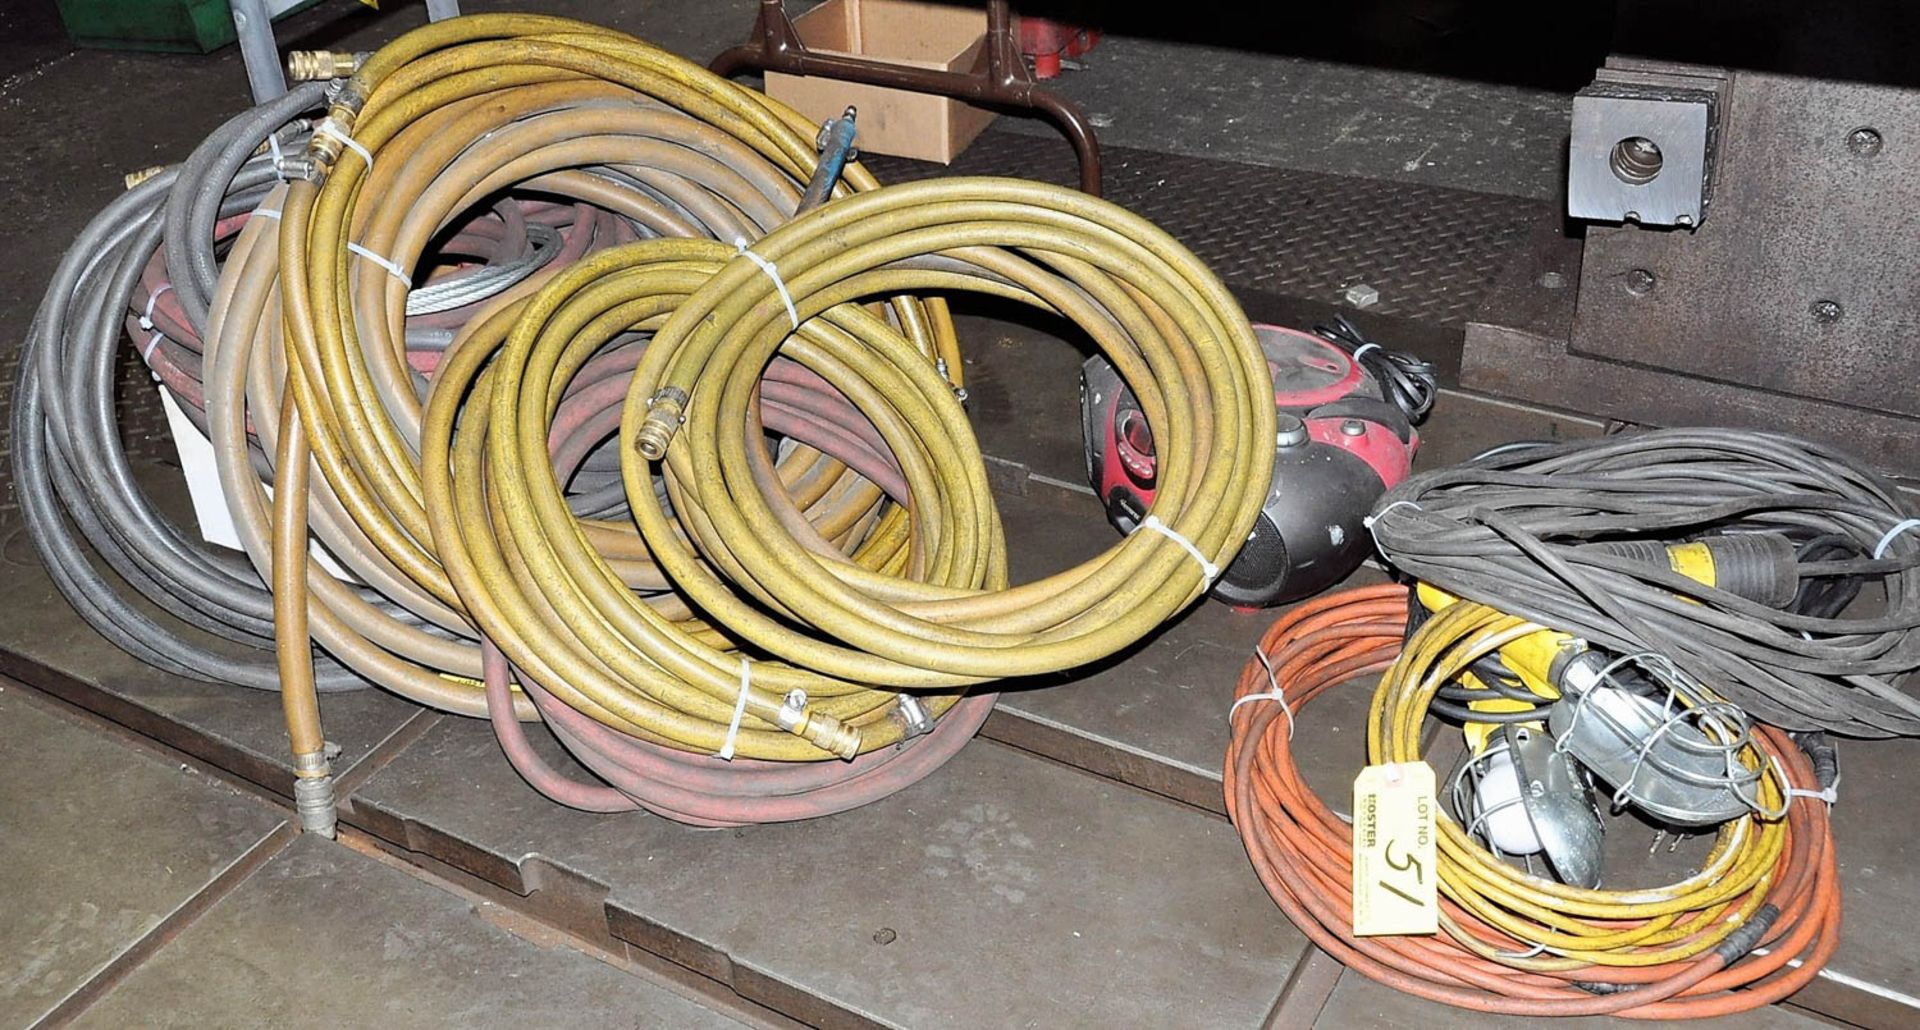 Lot of Air Hose, Extension Cords and Lights Under Table